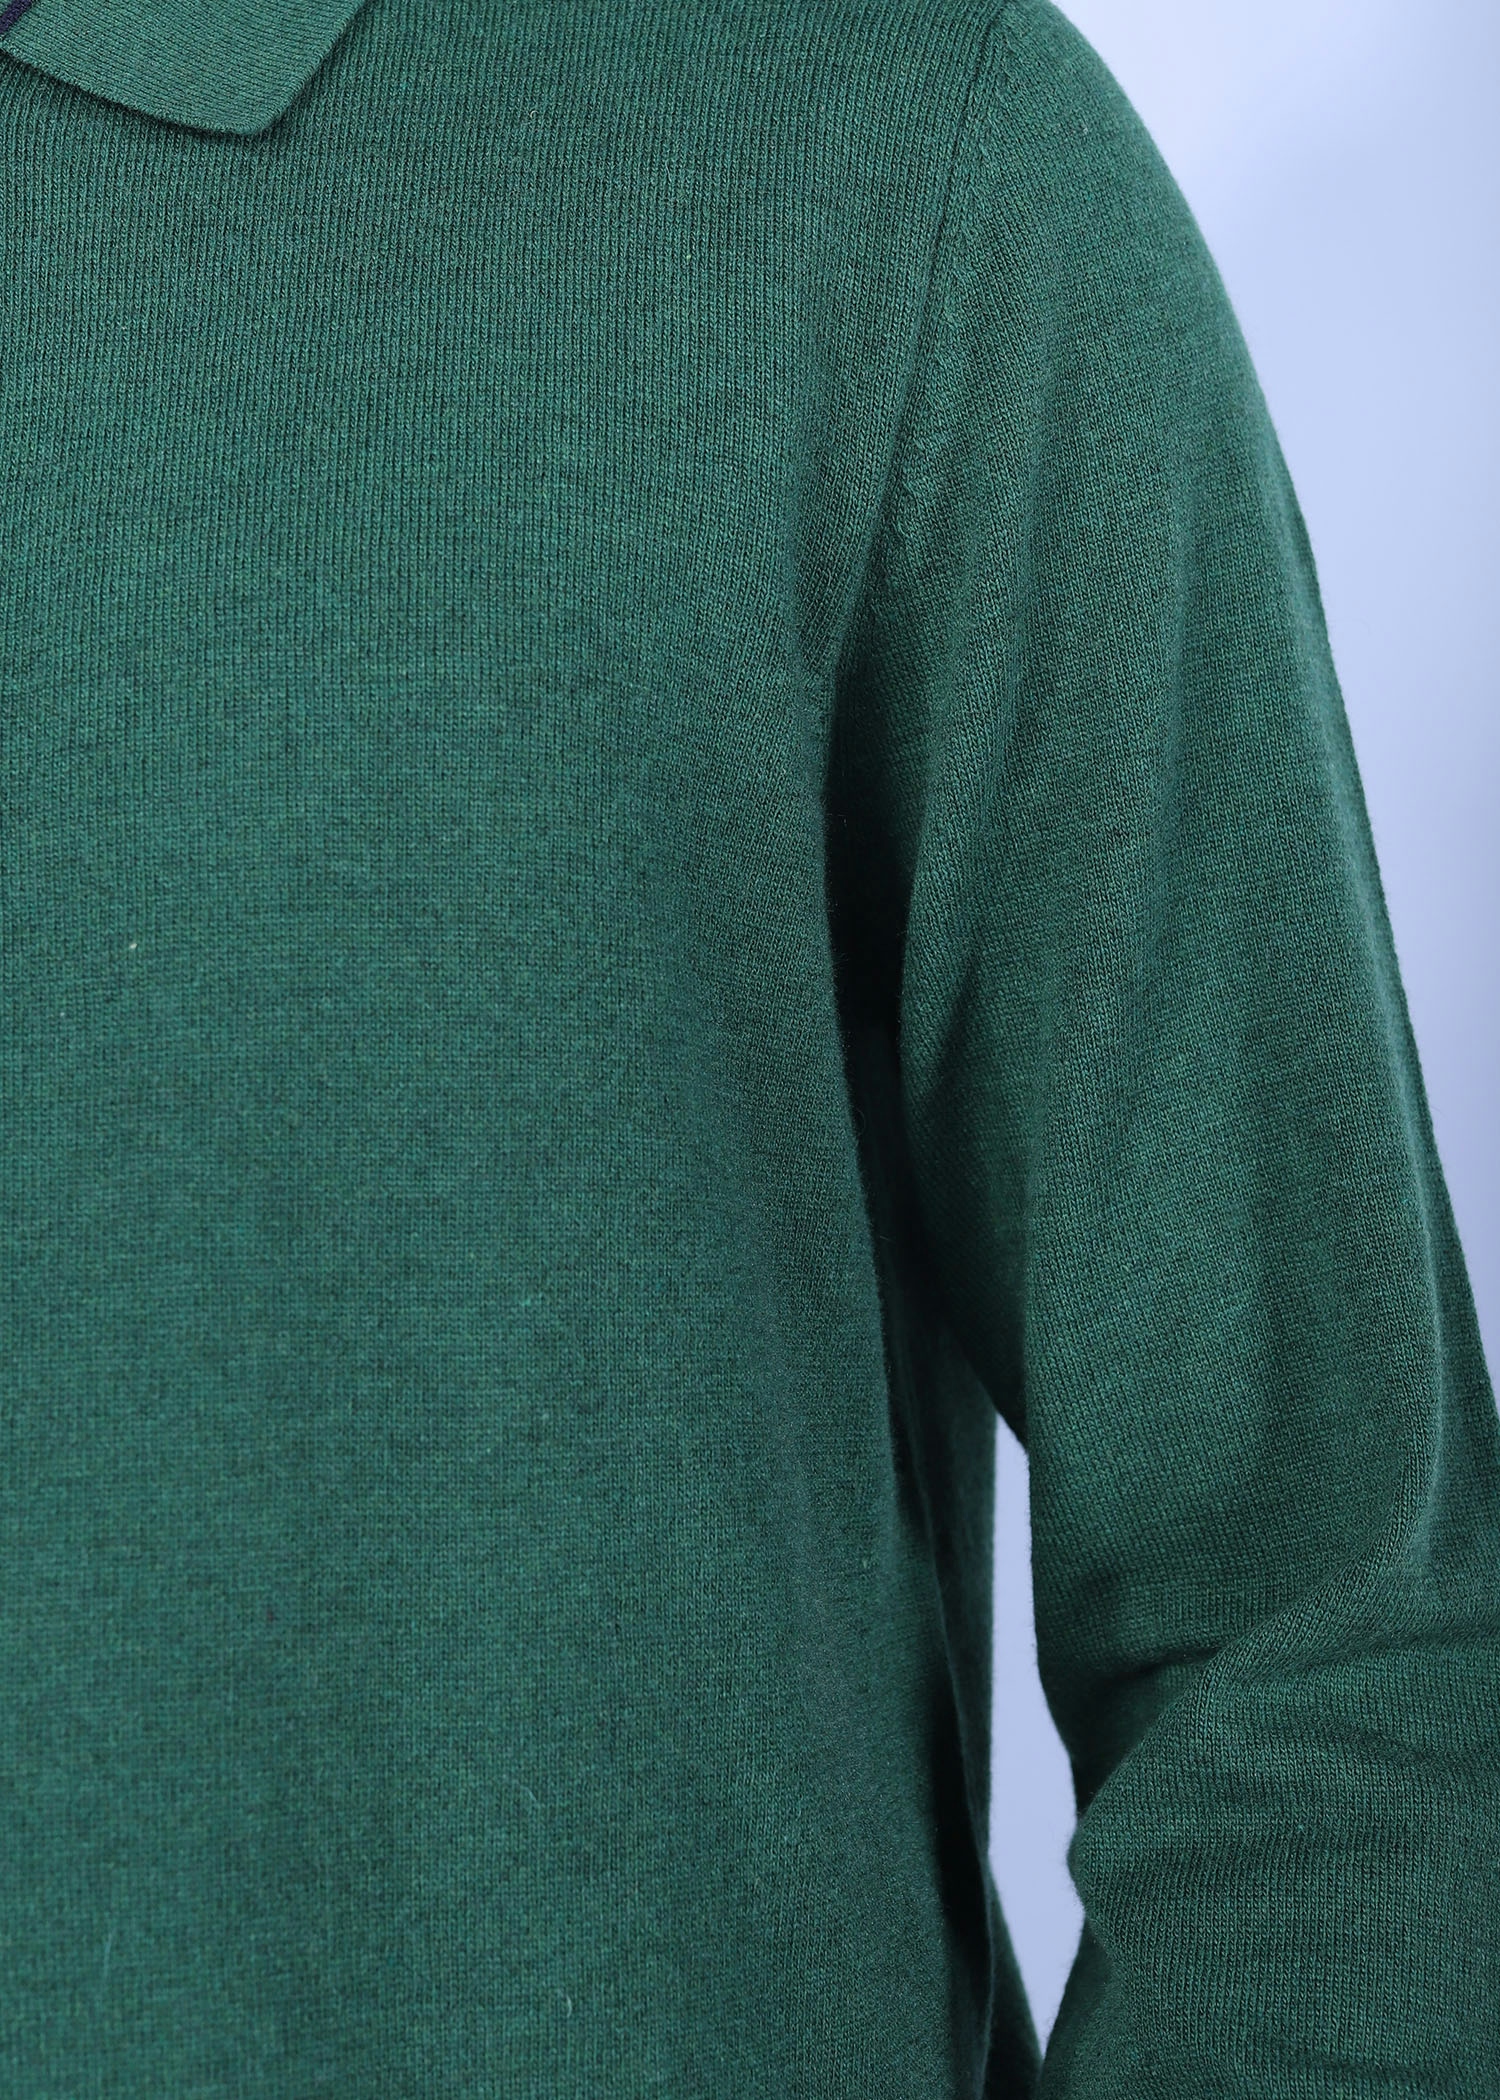 athens sweater green color close front view